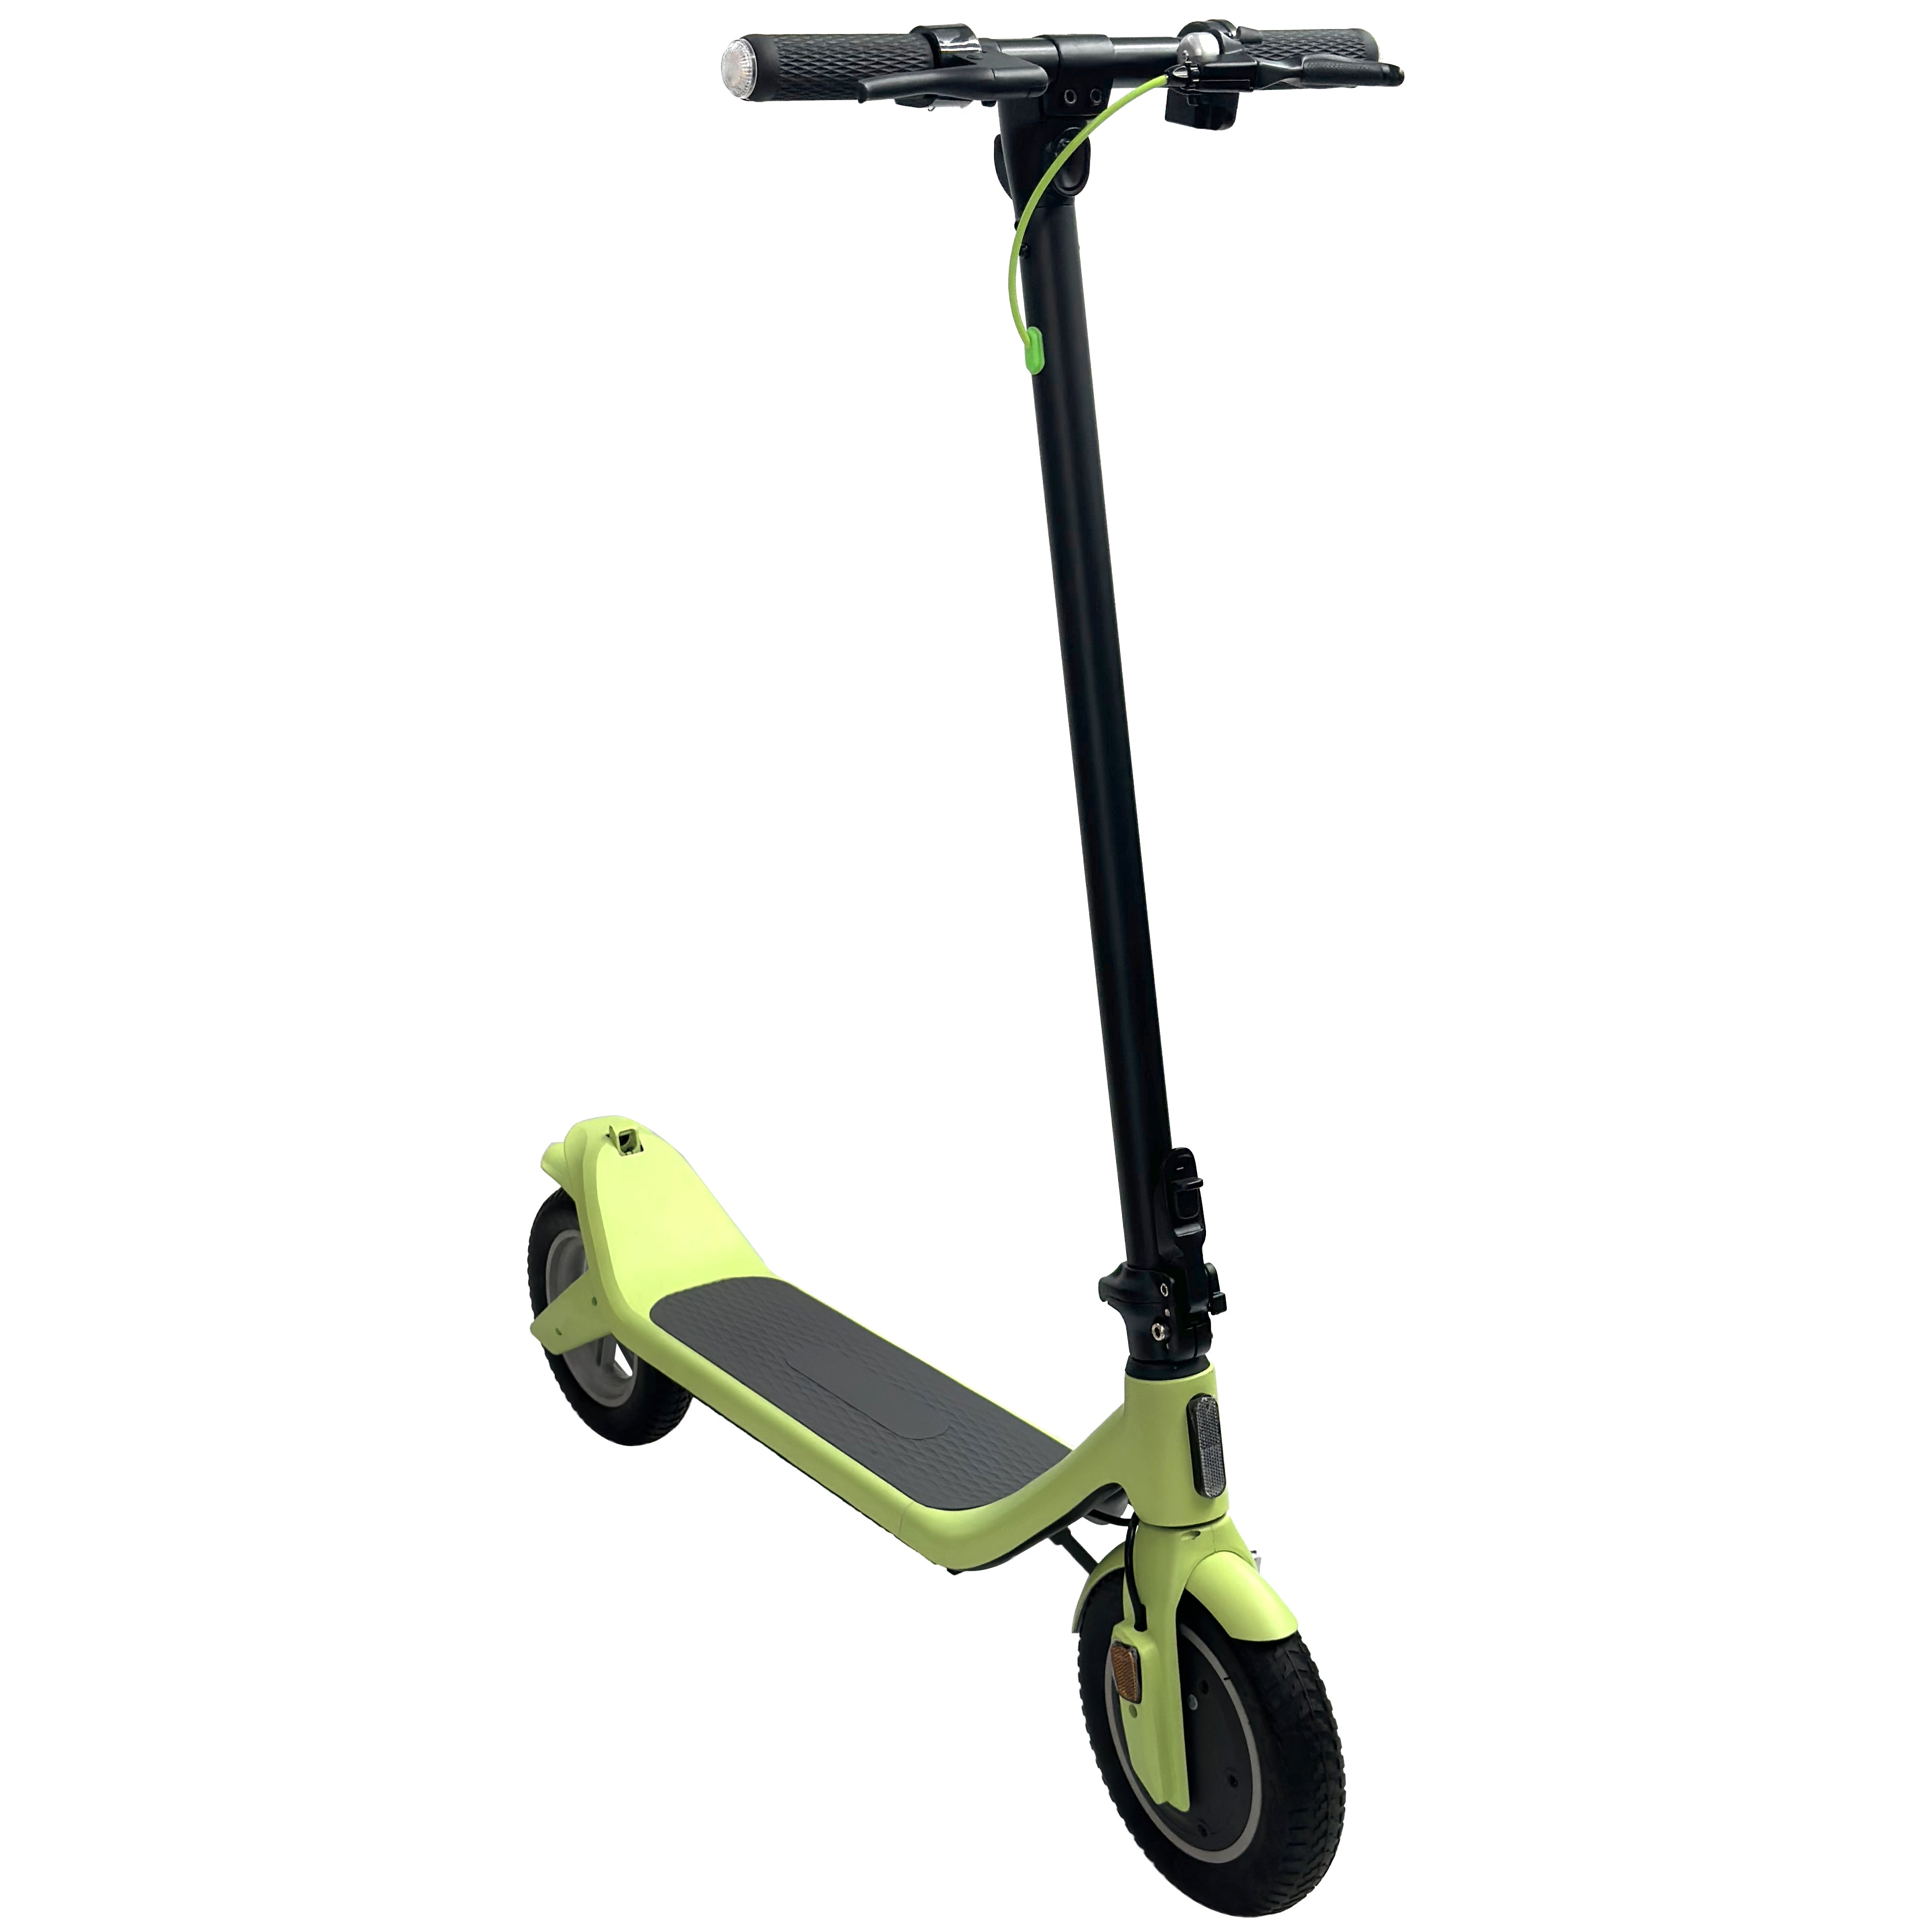 M1 15-35kms range E Scooter with 350W motor 36V 7.5Ah Lithium Battery